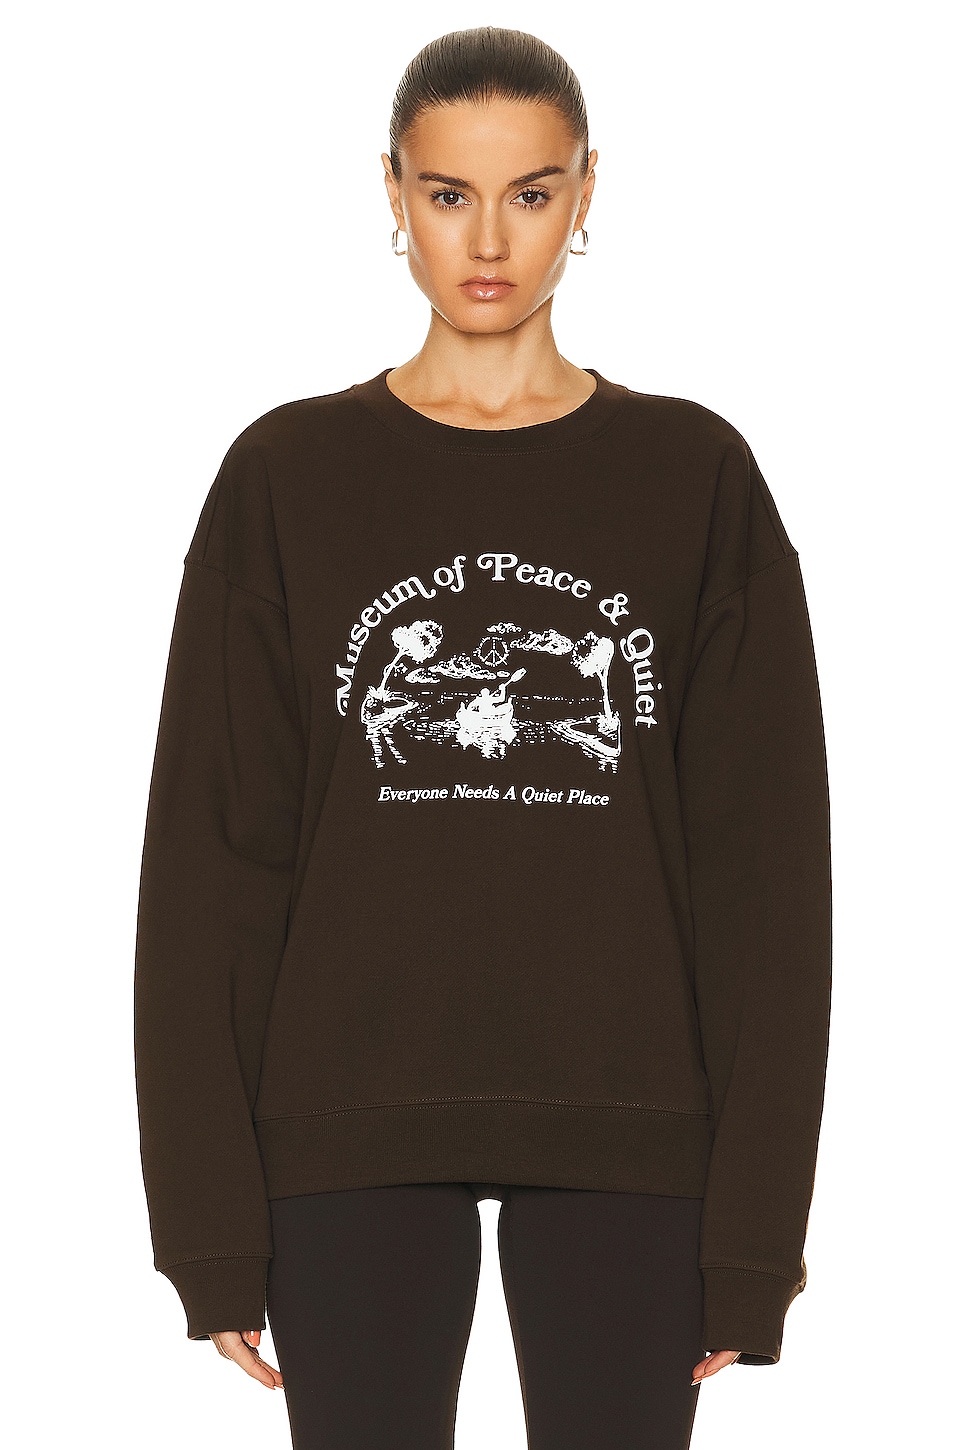 Image 1 of Museum of Peace and Quiet Place Sweater in Brown